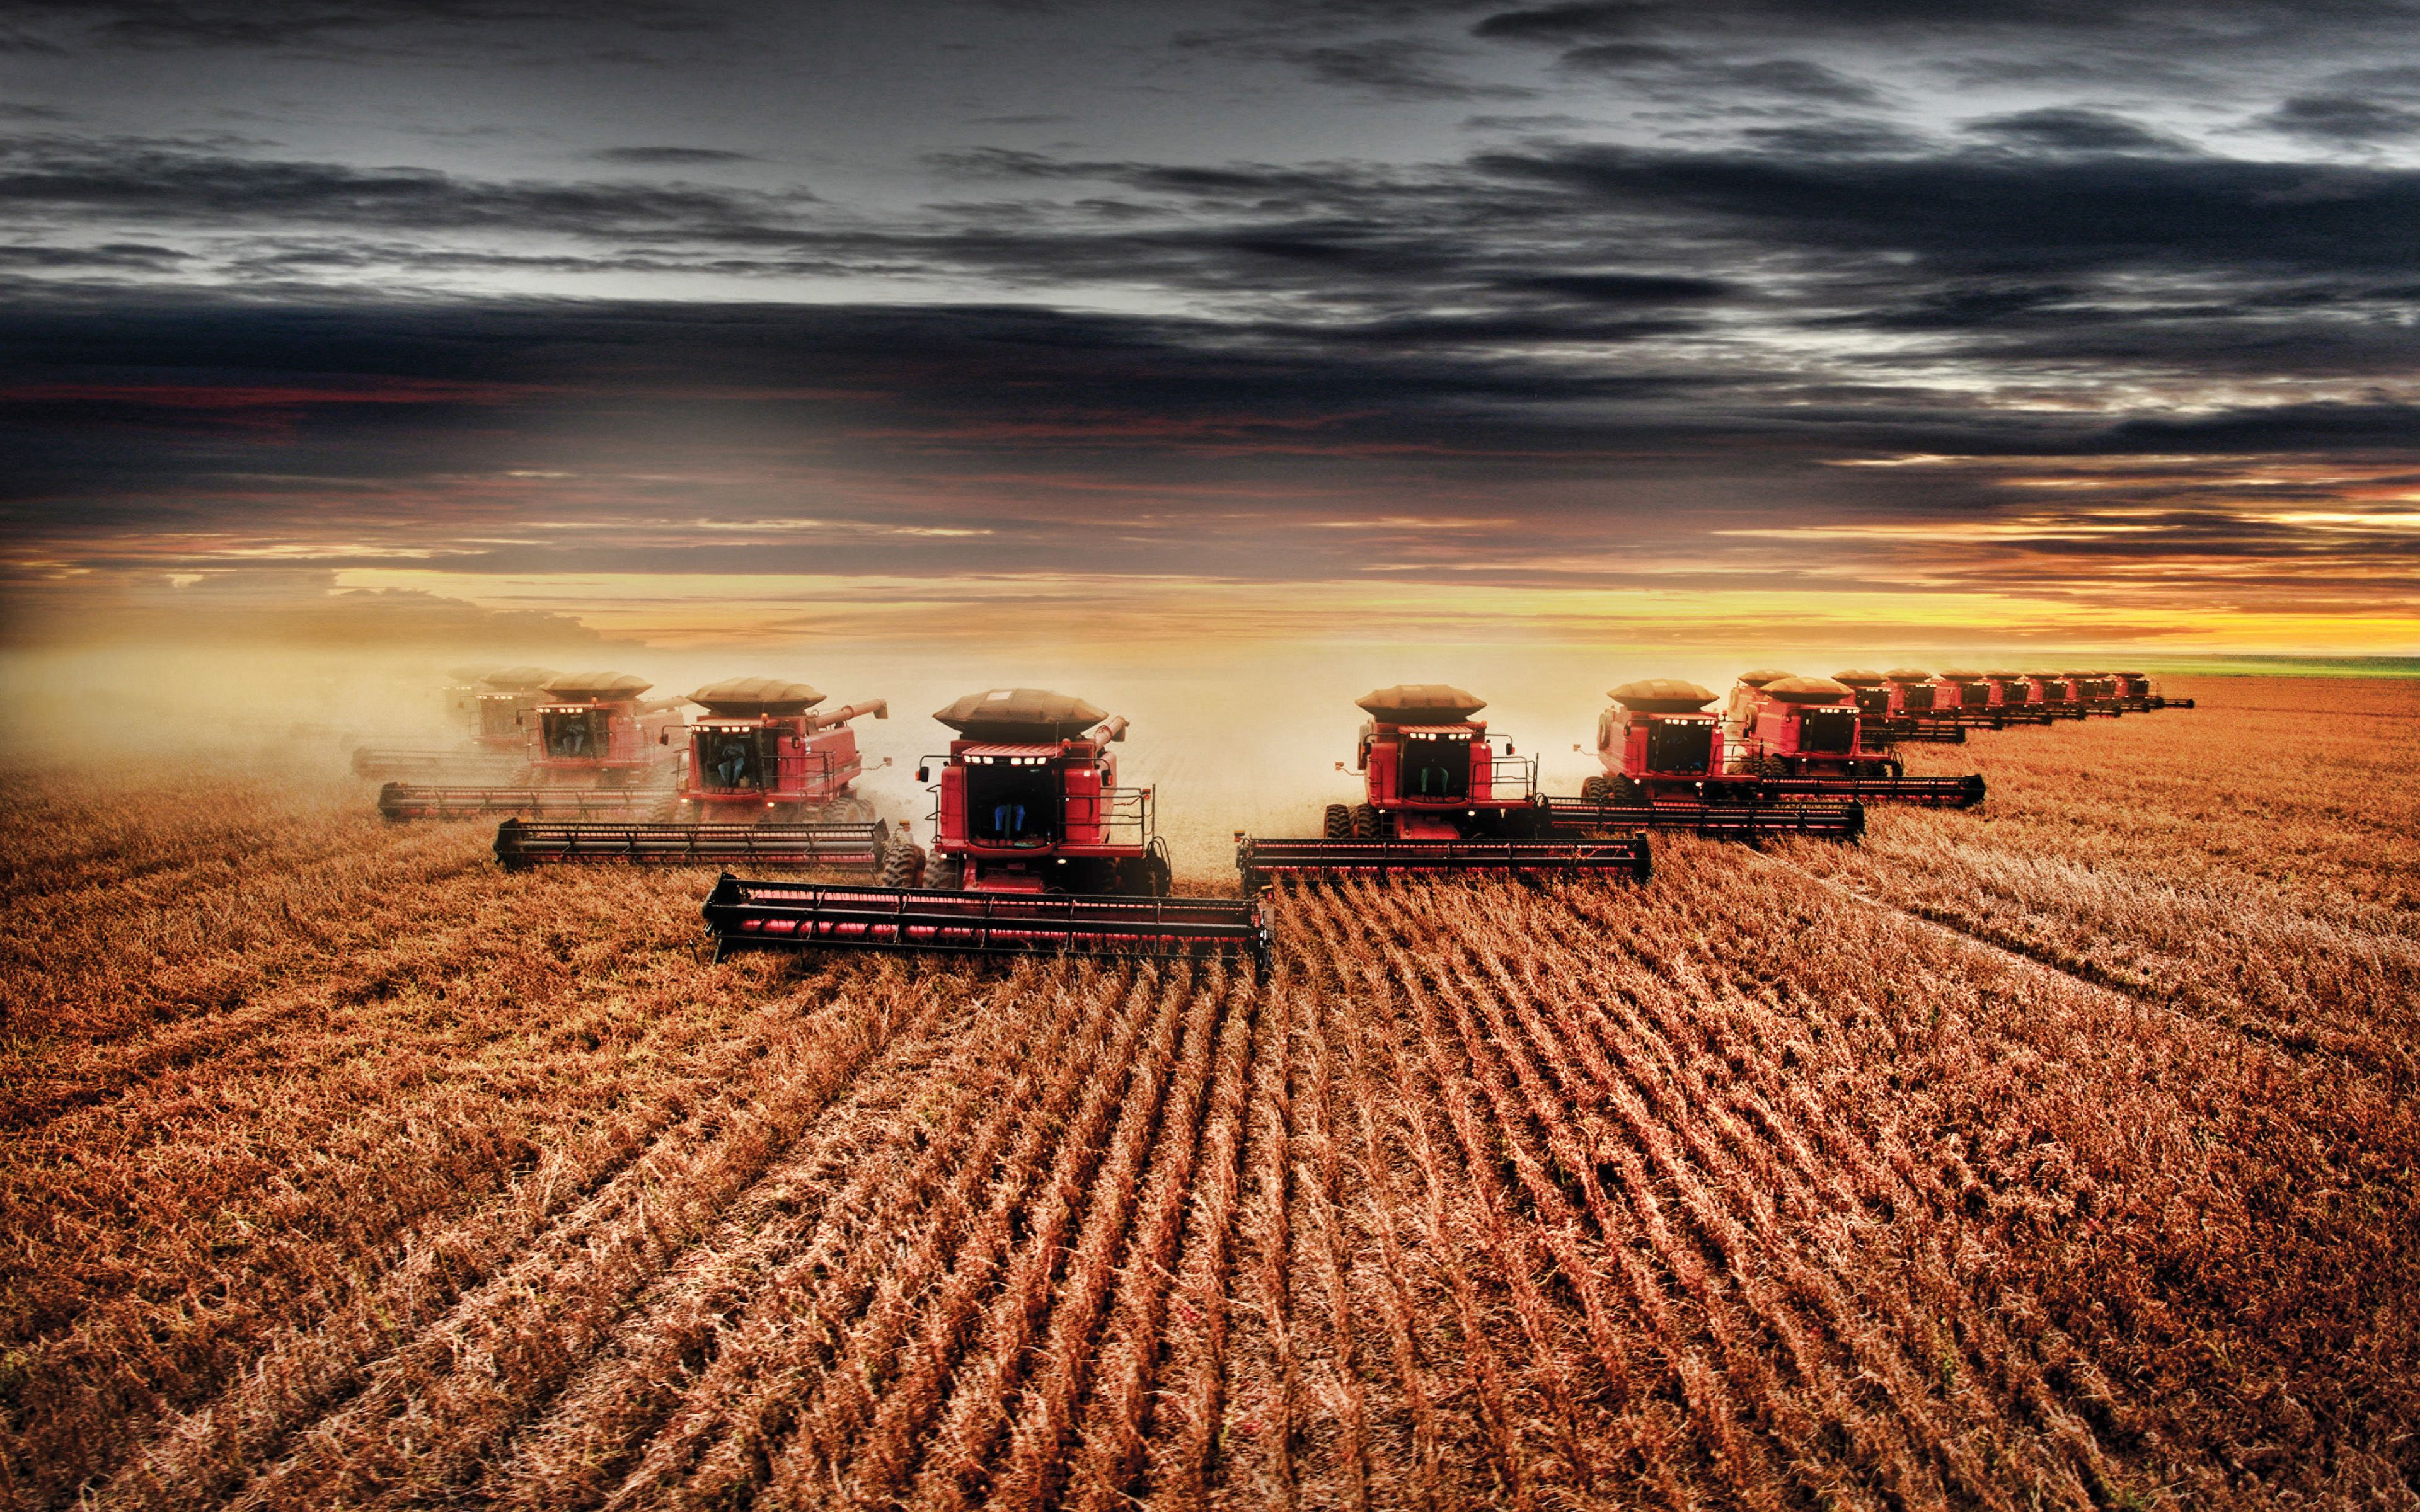 Download wallpaper Case IH Axial Flow 4k, harvest, 2019 combines, agricultural machinery, HDR, wheat harvest, Axial Flow Series, Combines in the field, agriculture, Case for desktop with resolution 3840x2400. High Quality